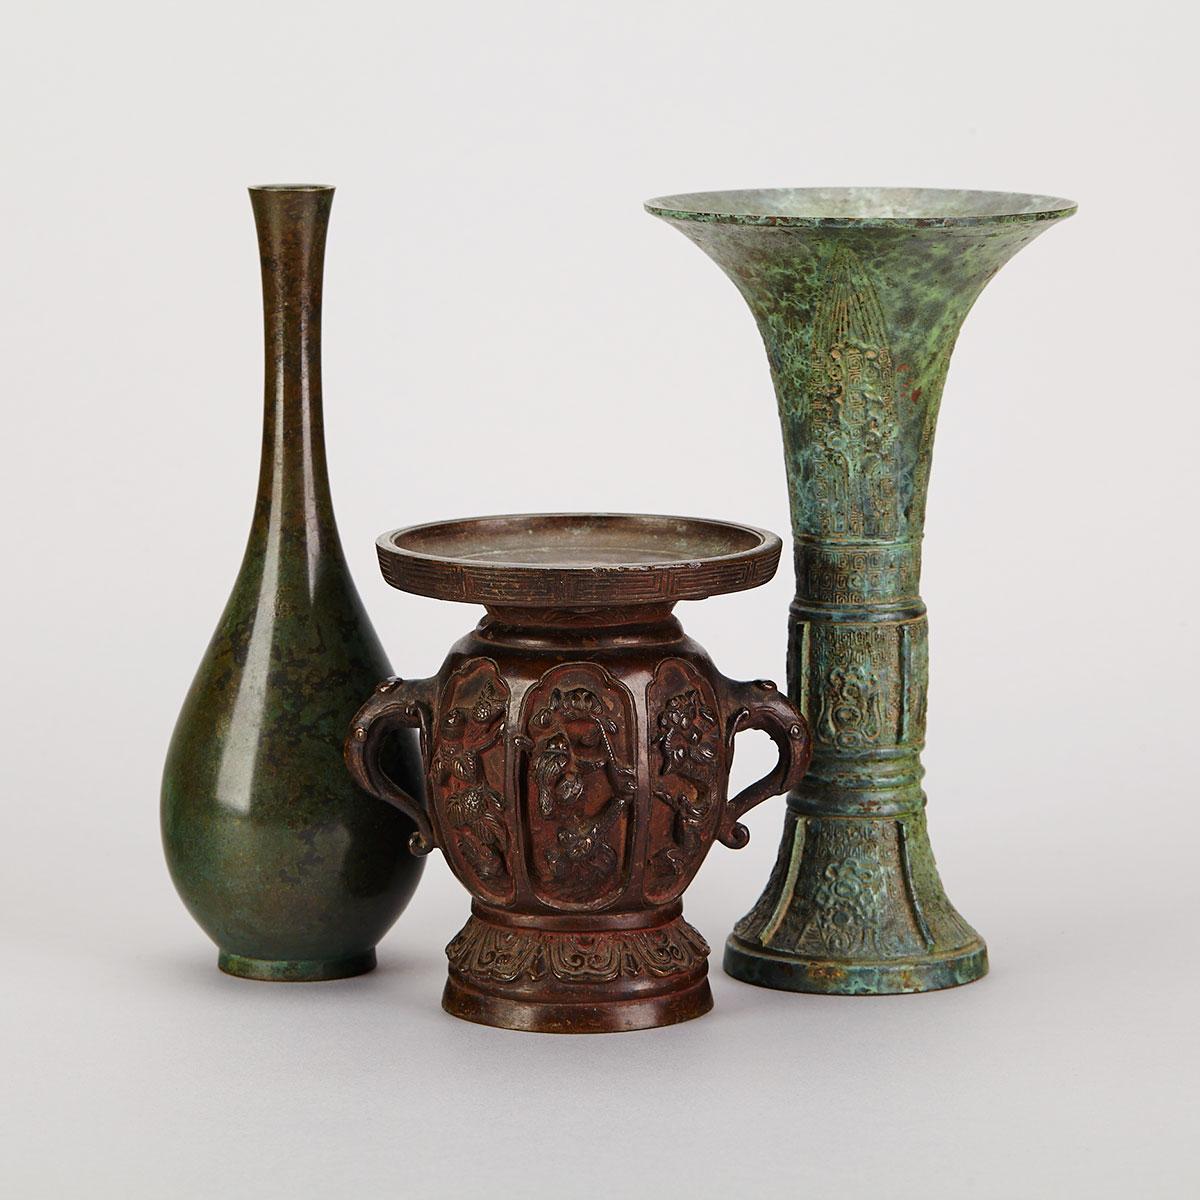 Three Bronze Vases, Late 19th to Early 20th Century